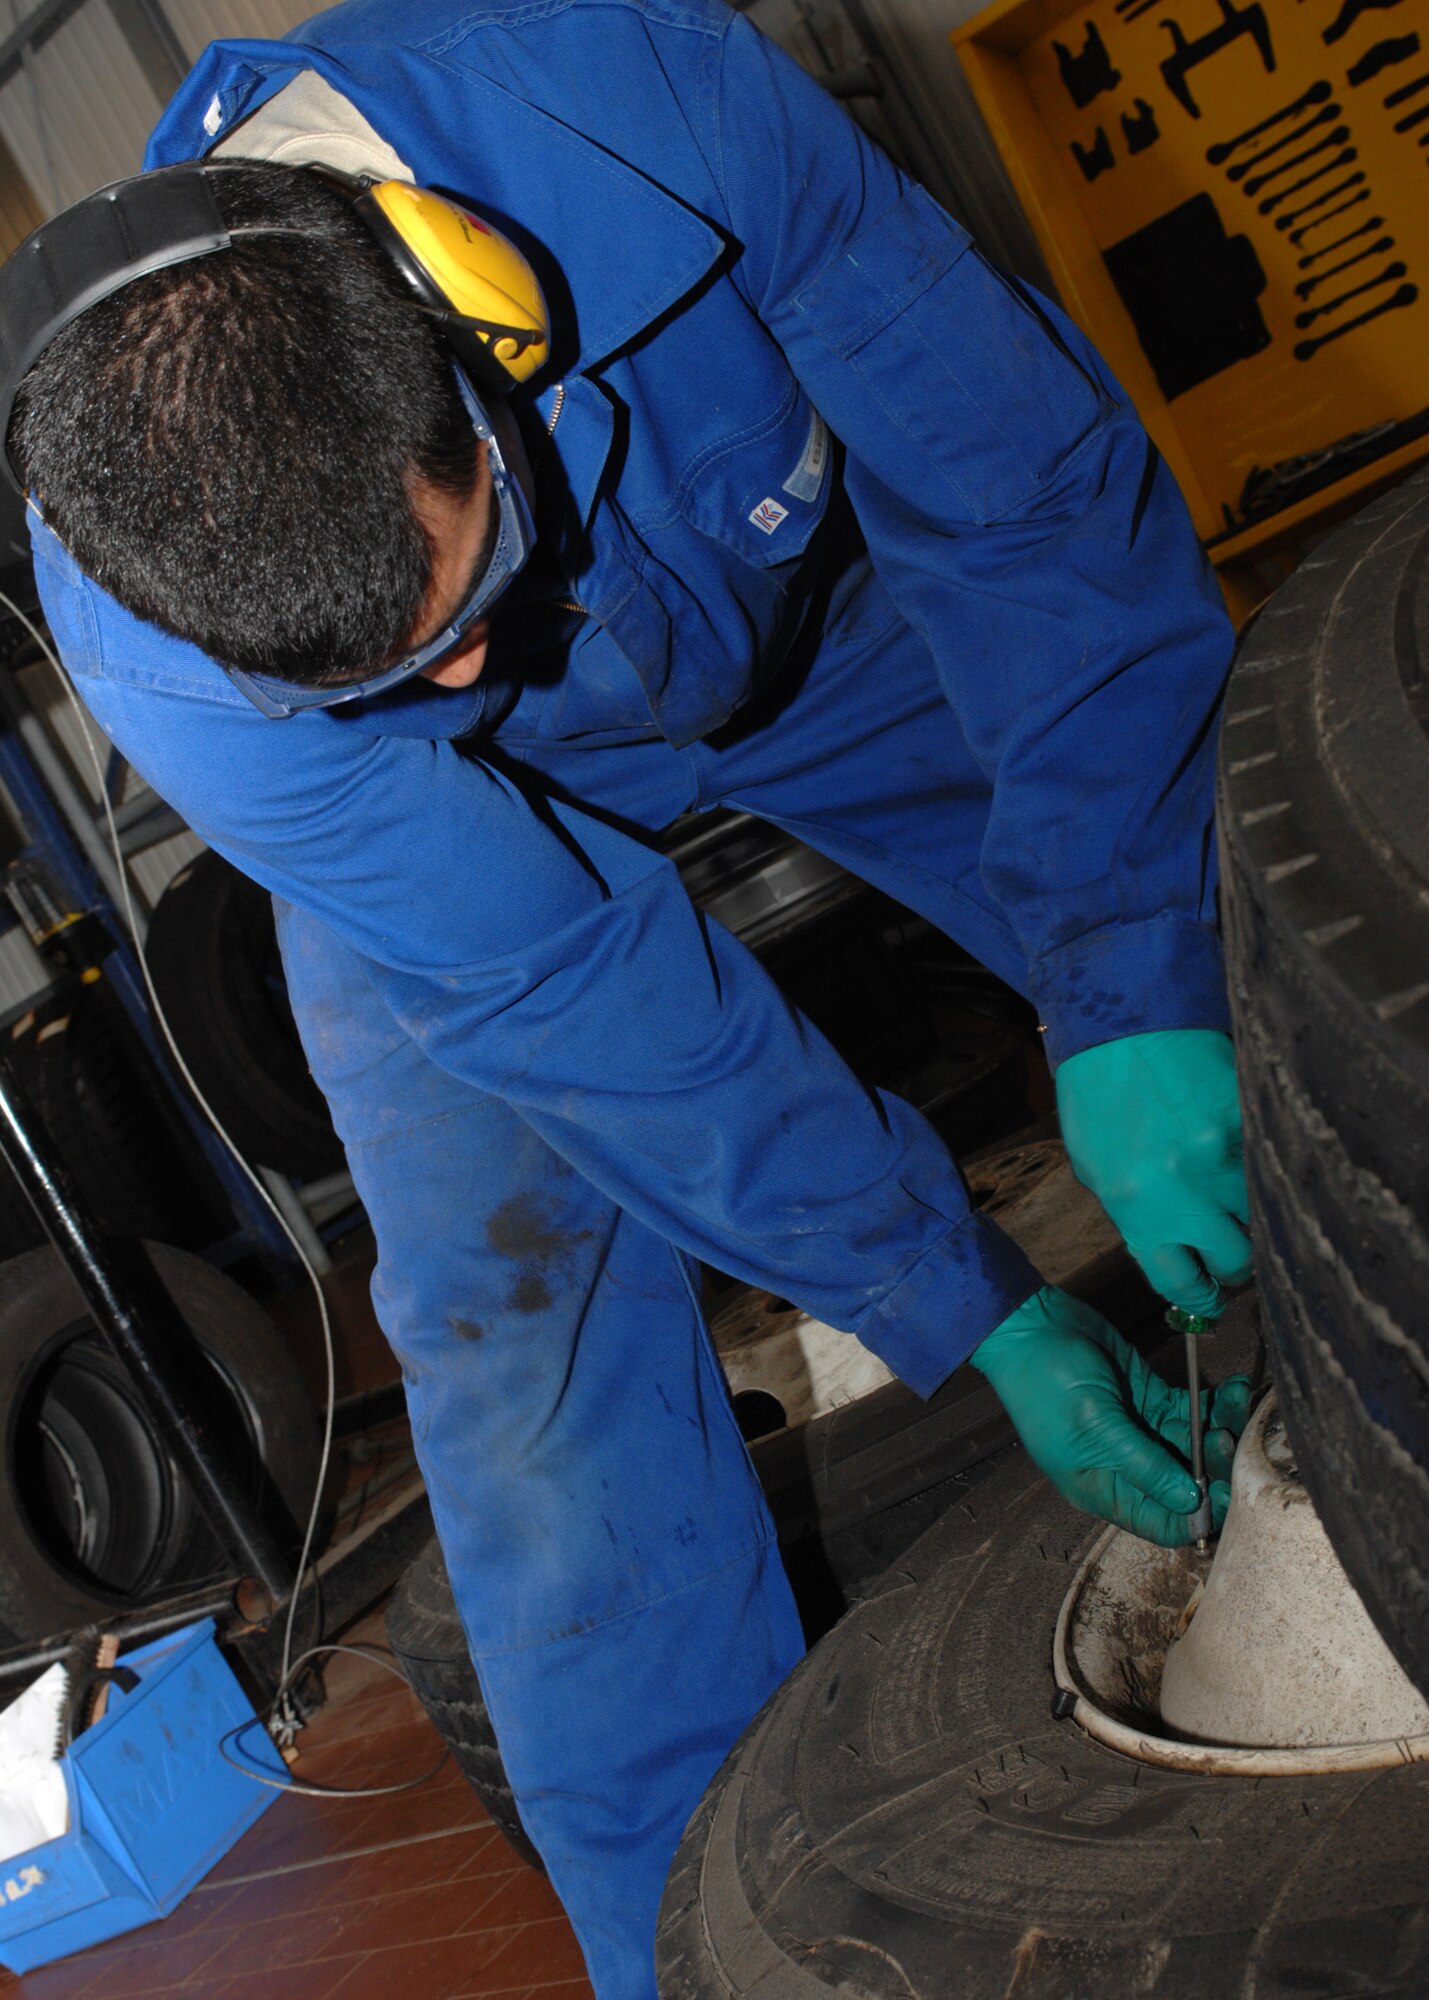 SPANGDAHLEM AIR BASE, Germany -- Airman 1st Class Adrian Cortez, 52nd Logistics Readiness Squadron, releases air from a tire at the vehicle maintenance shop April 14, 2008. Airman Cortez releases the pressure so he can change the tire. (U.S Air Force photo/Airman 1st Class Jenifer Calhoun)